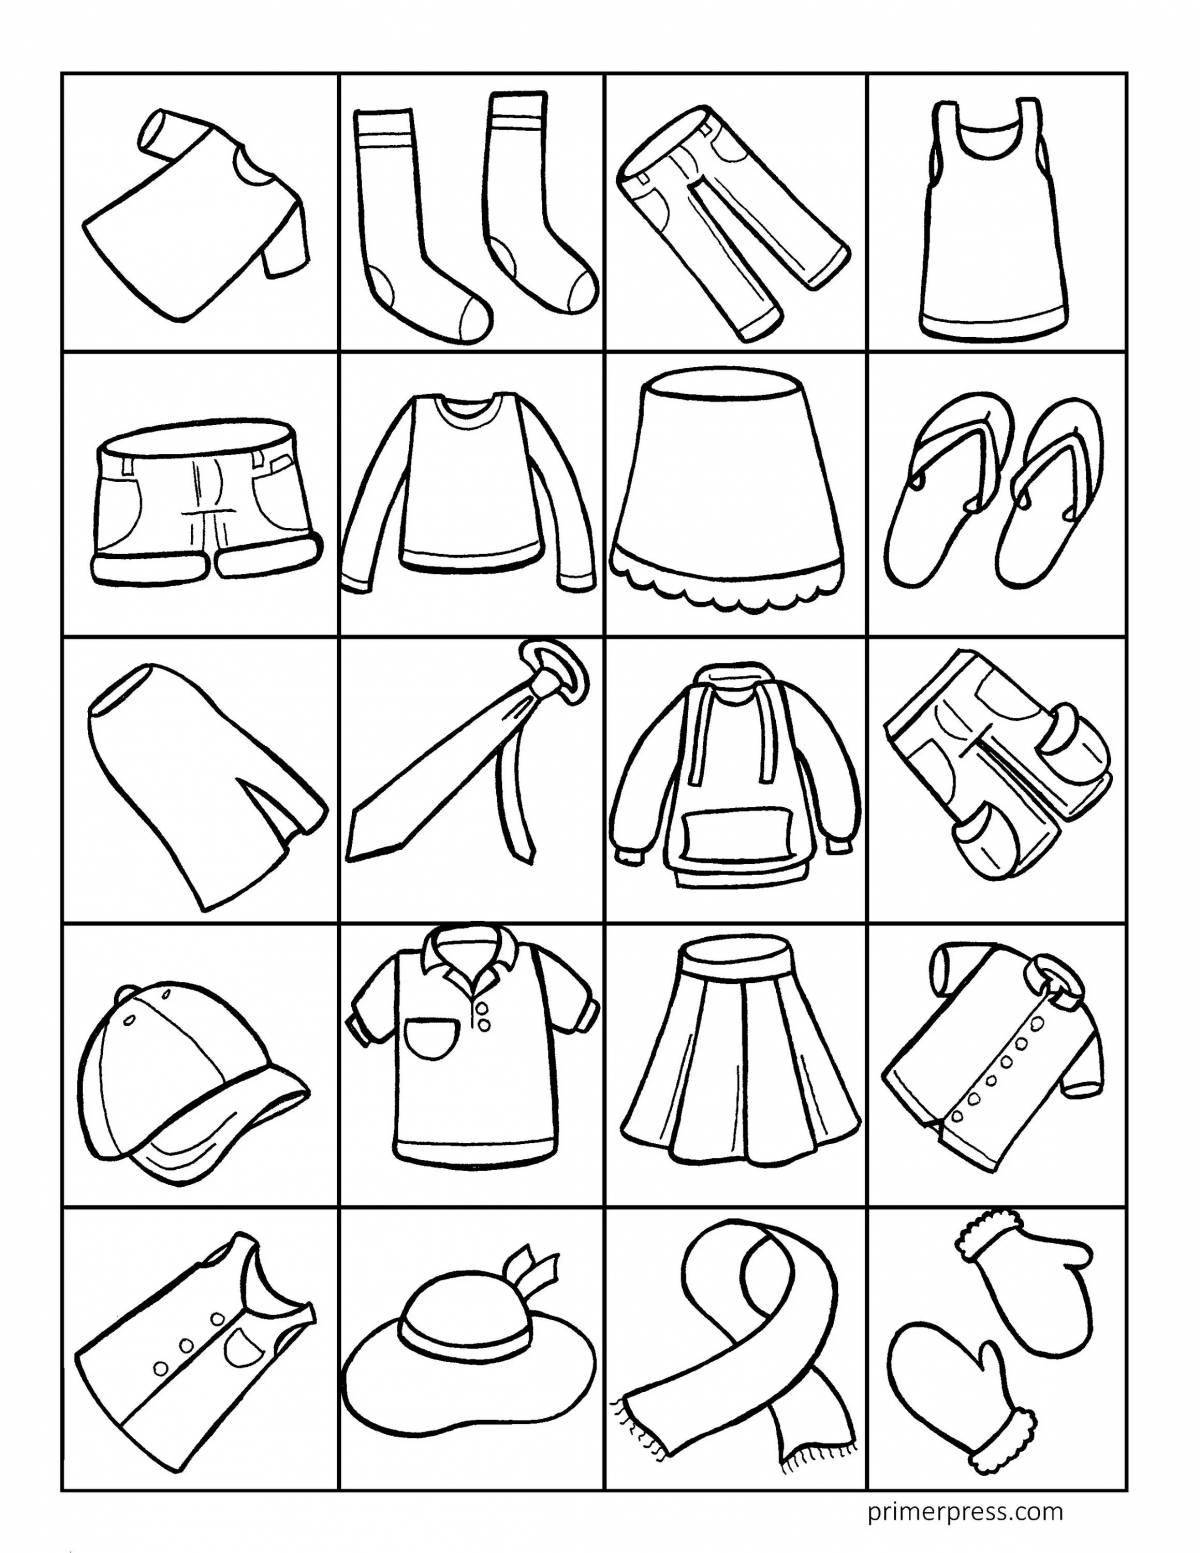 Coloring page elegant winter clothes